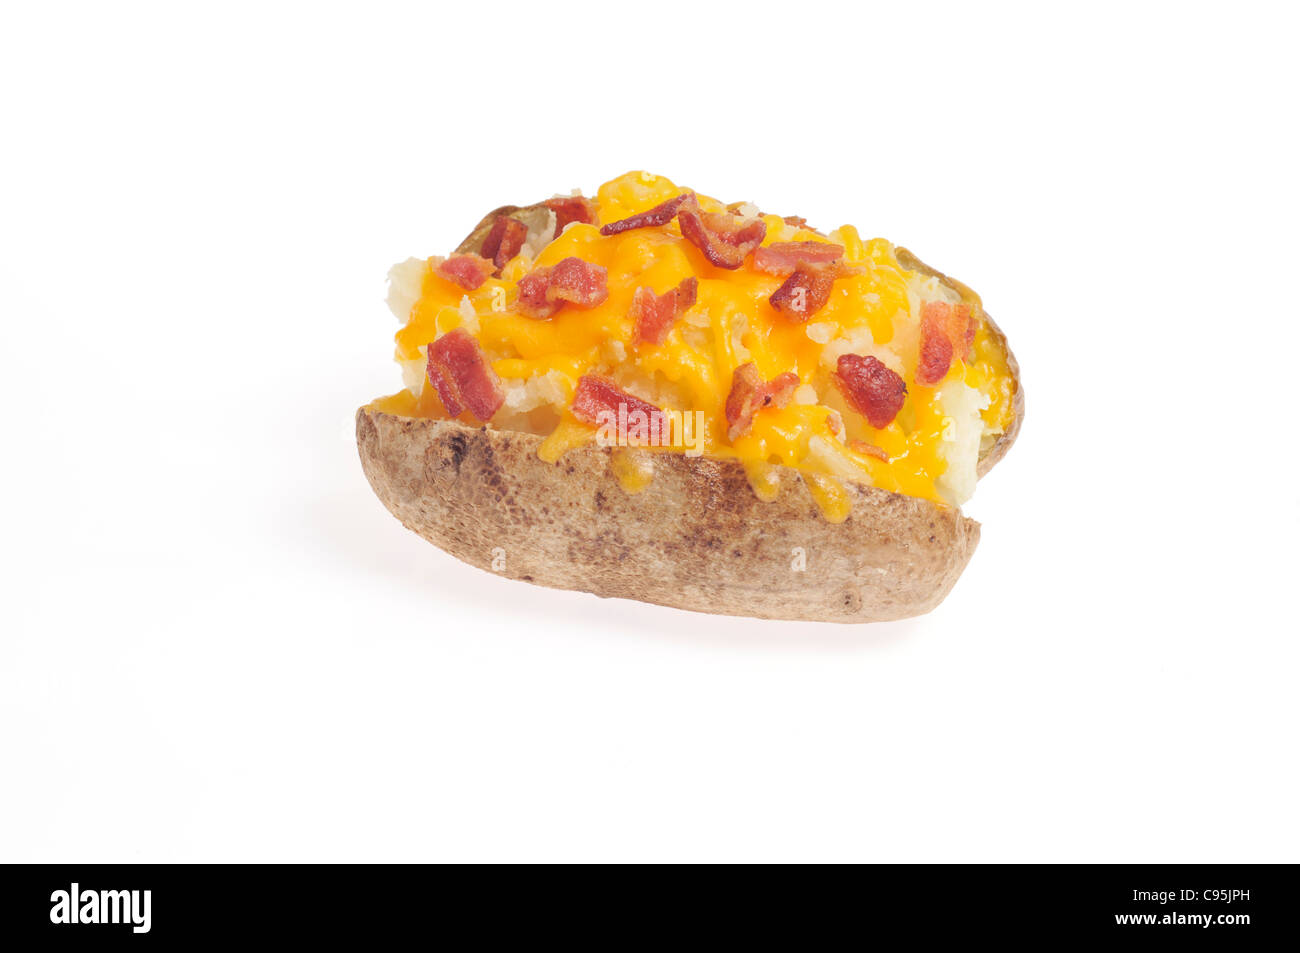 Baked potato topped with melted cheese and bacon bits on white background cutout. Stock Photo